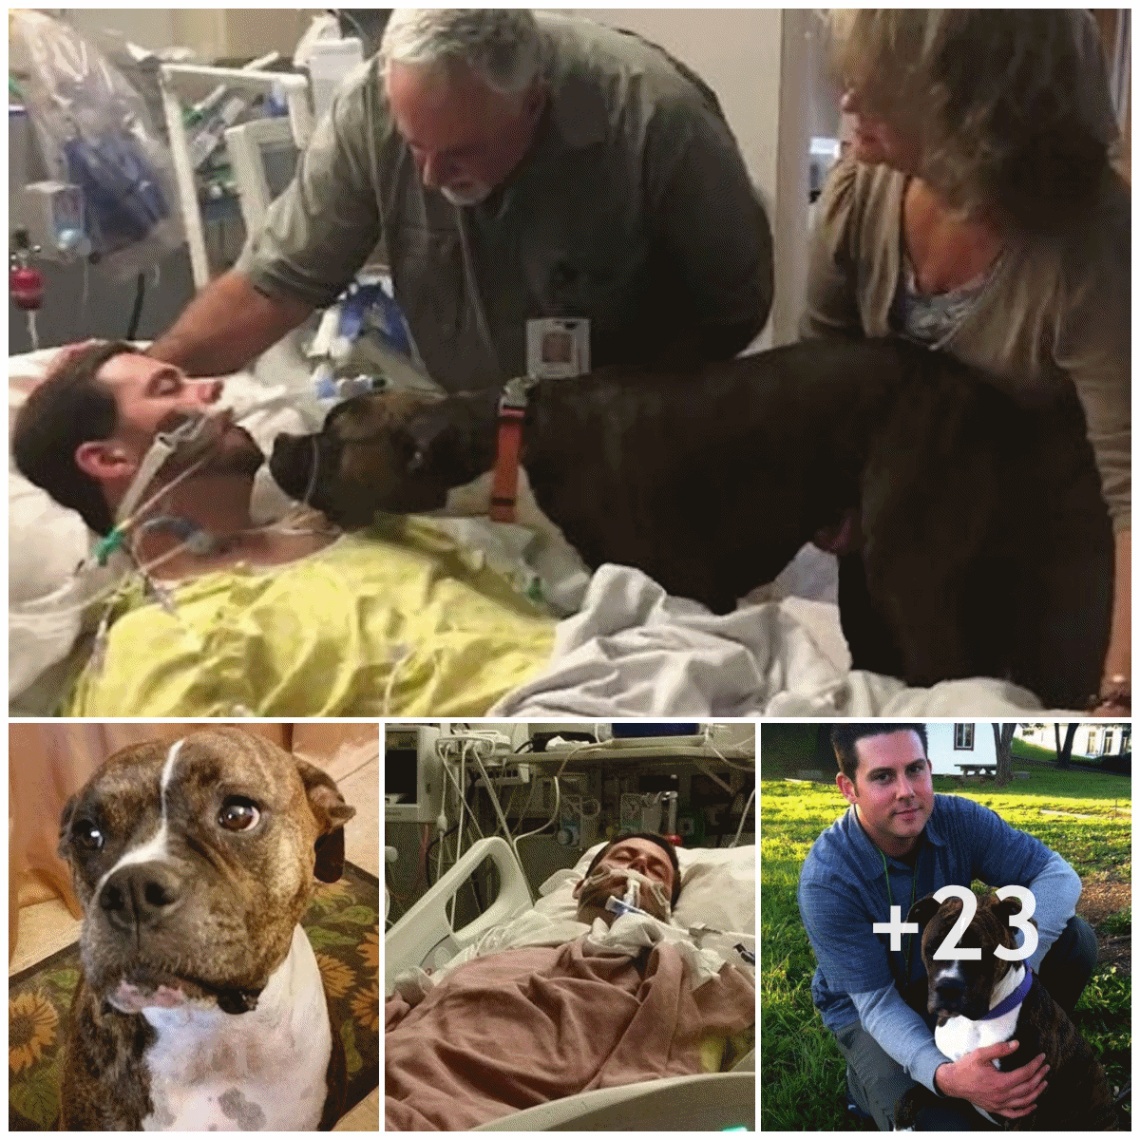 The moment the dog met his owner for the last time and said goodbye, he cried and stayed by the hospital bed for a long time before leaving.